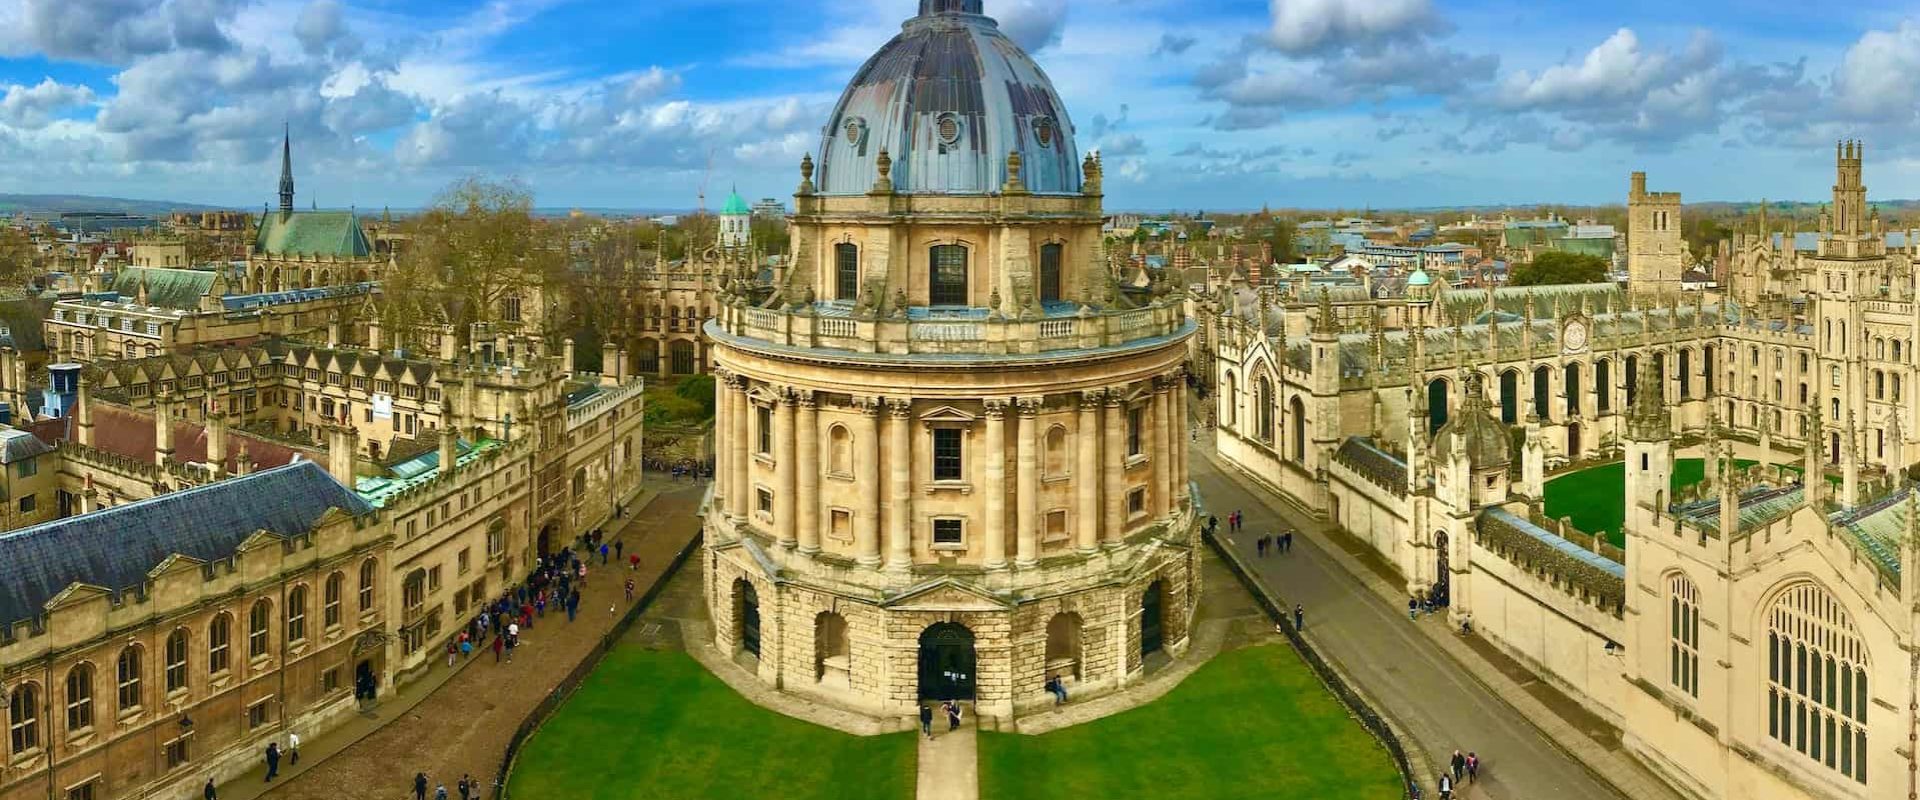 Student Good Guide at Oxford University in the UK